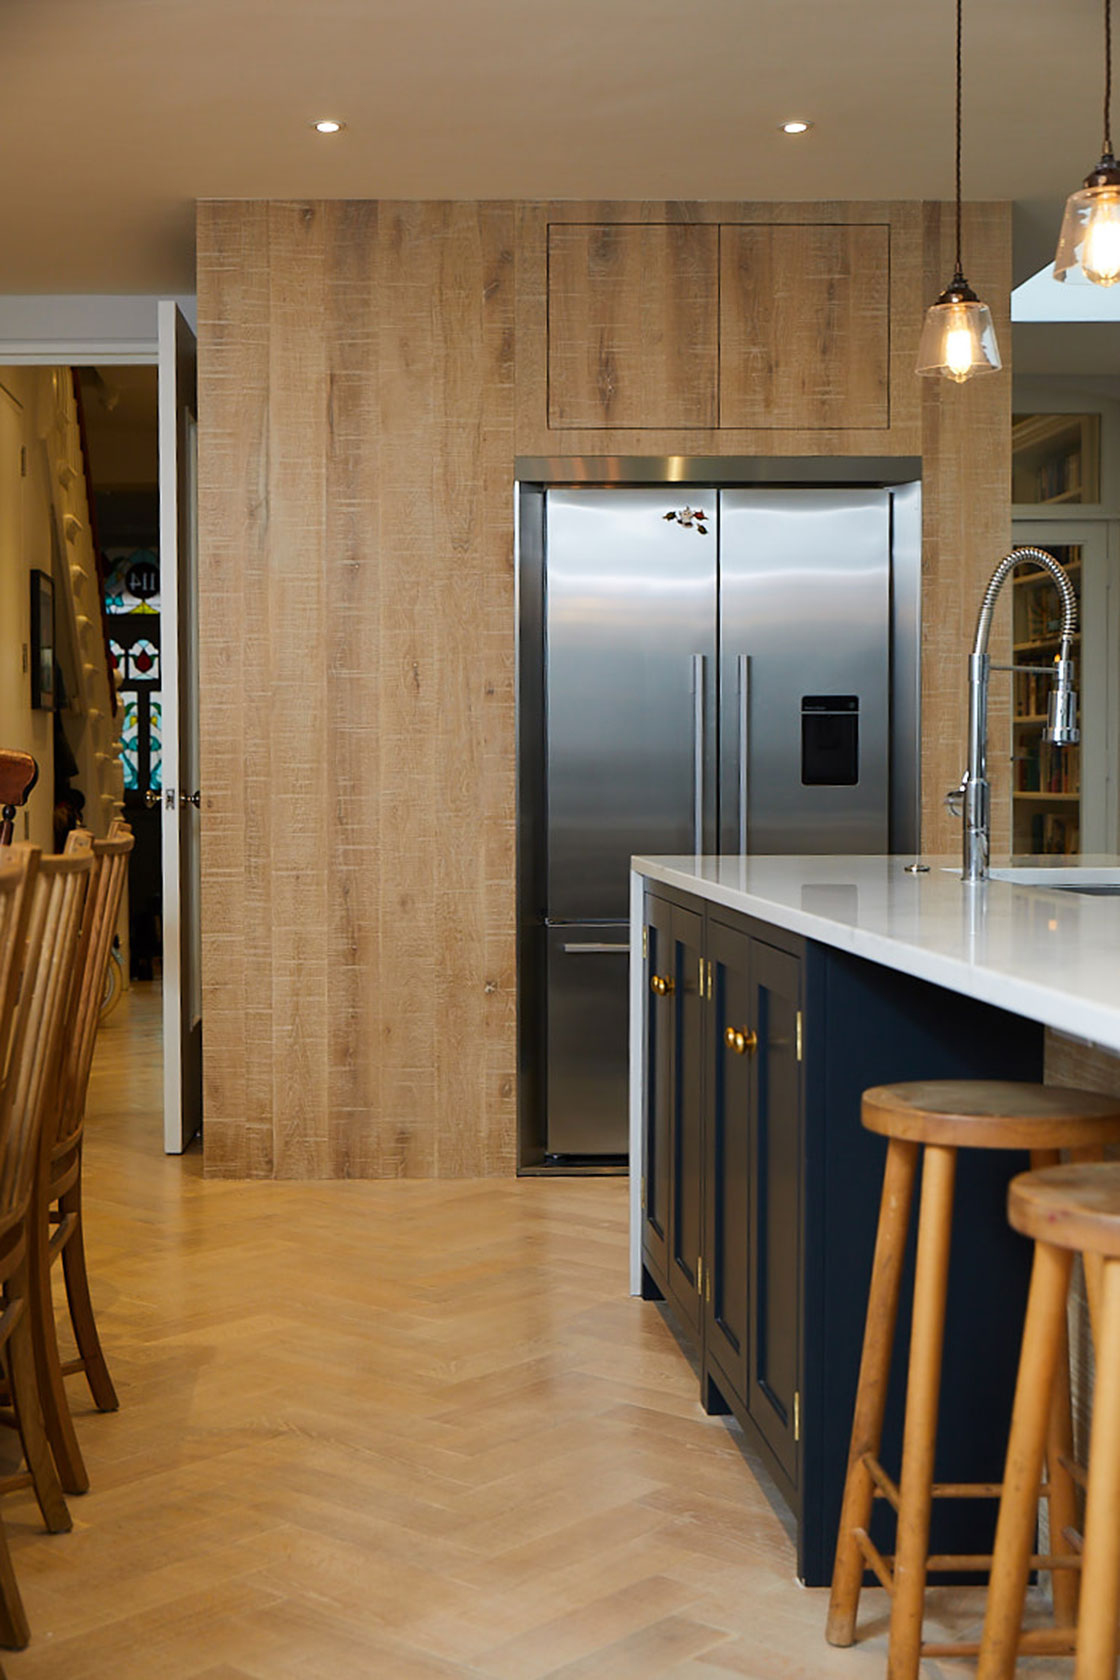 American Fisher & Paykel fridge freezer with surround in large limed oak kitchen units